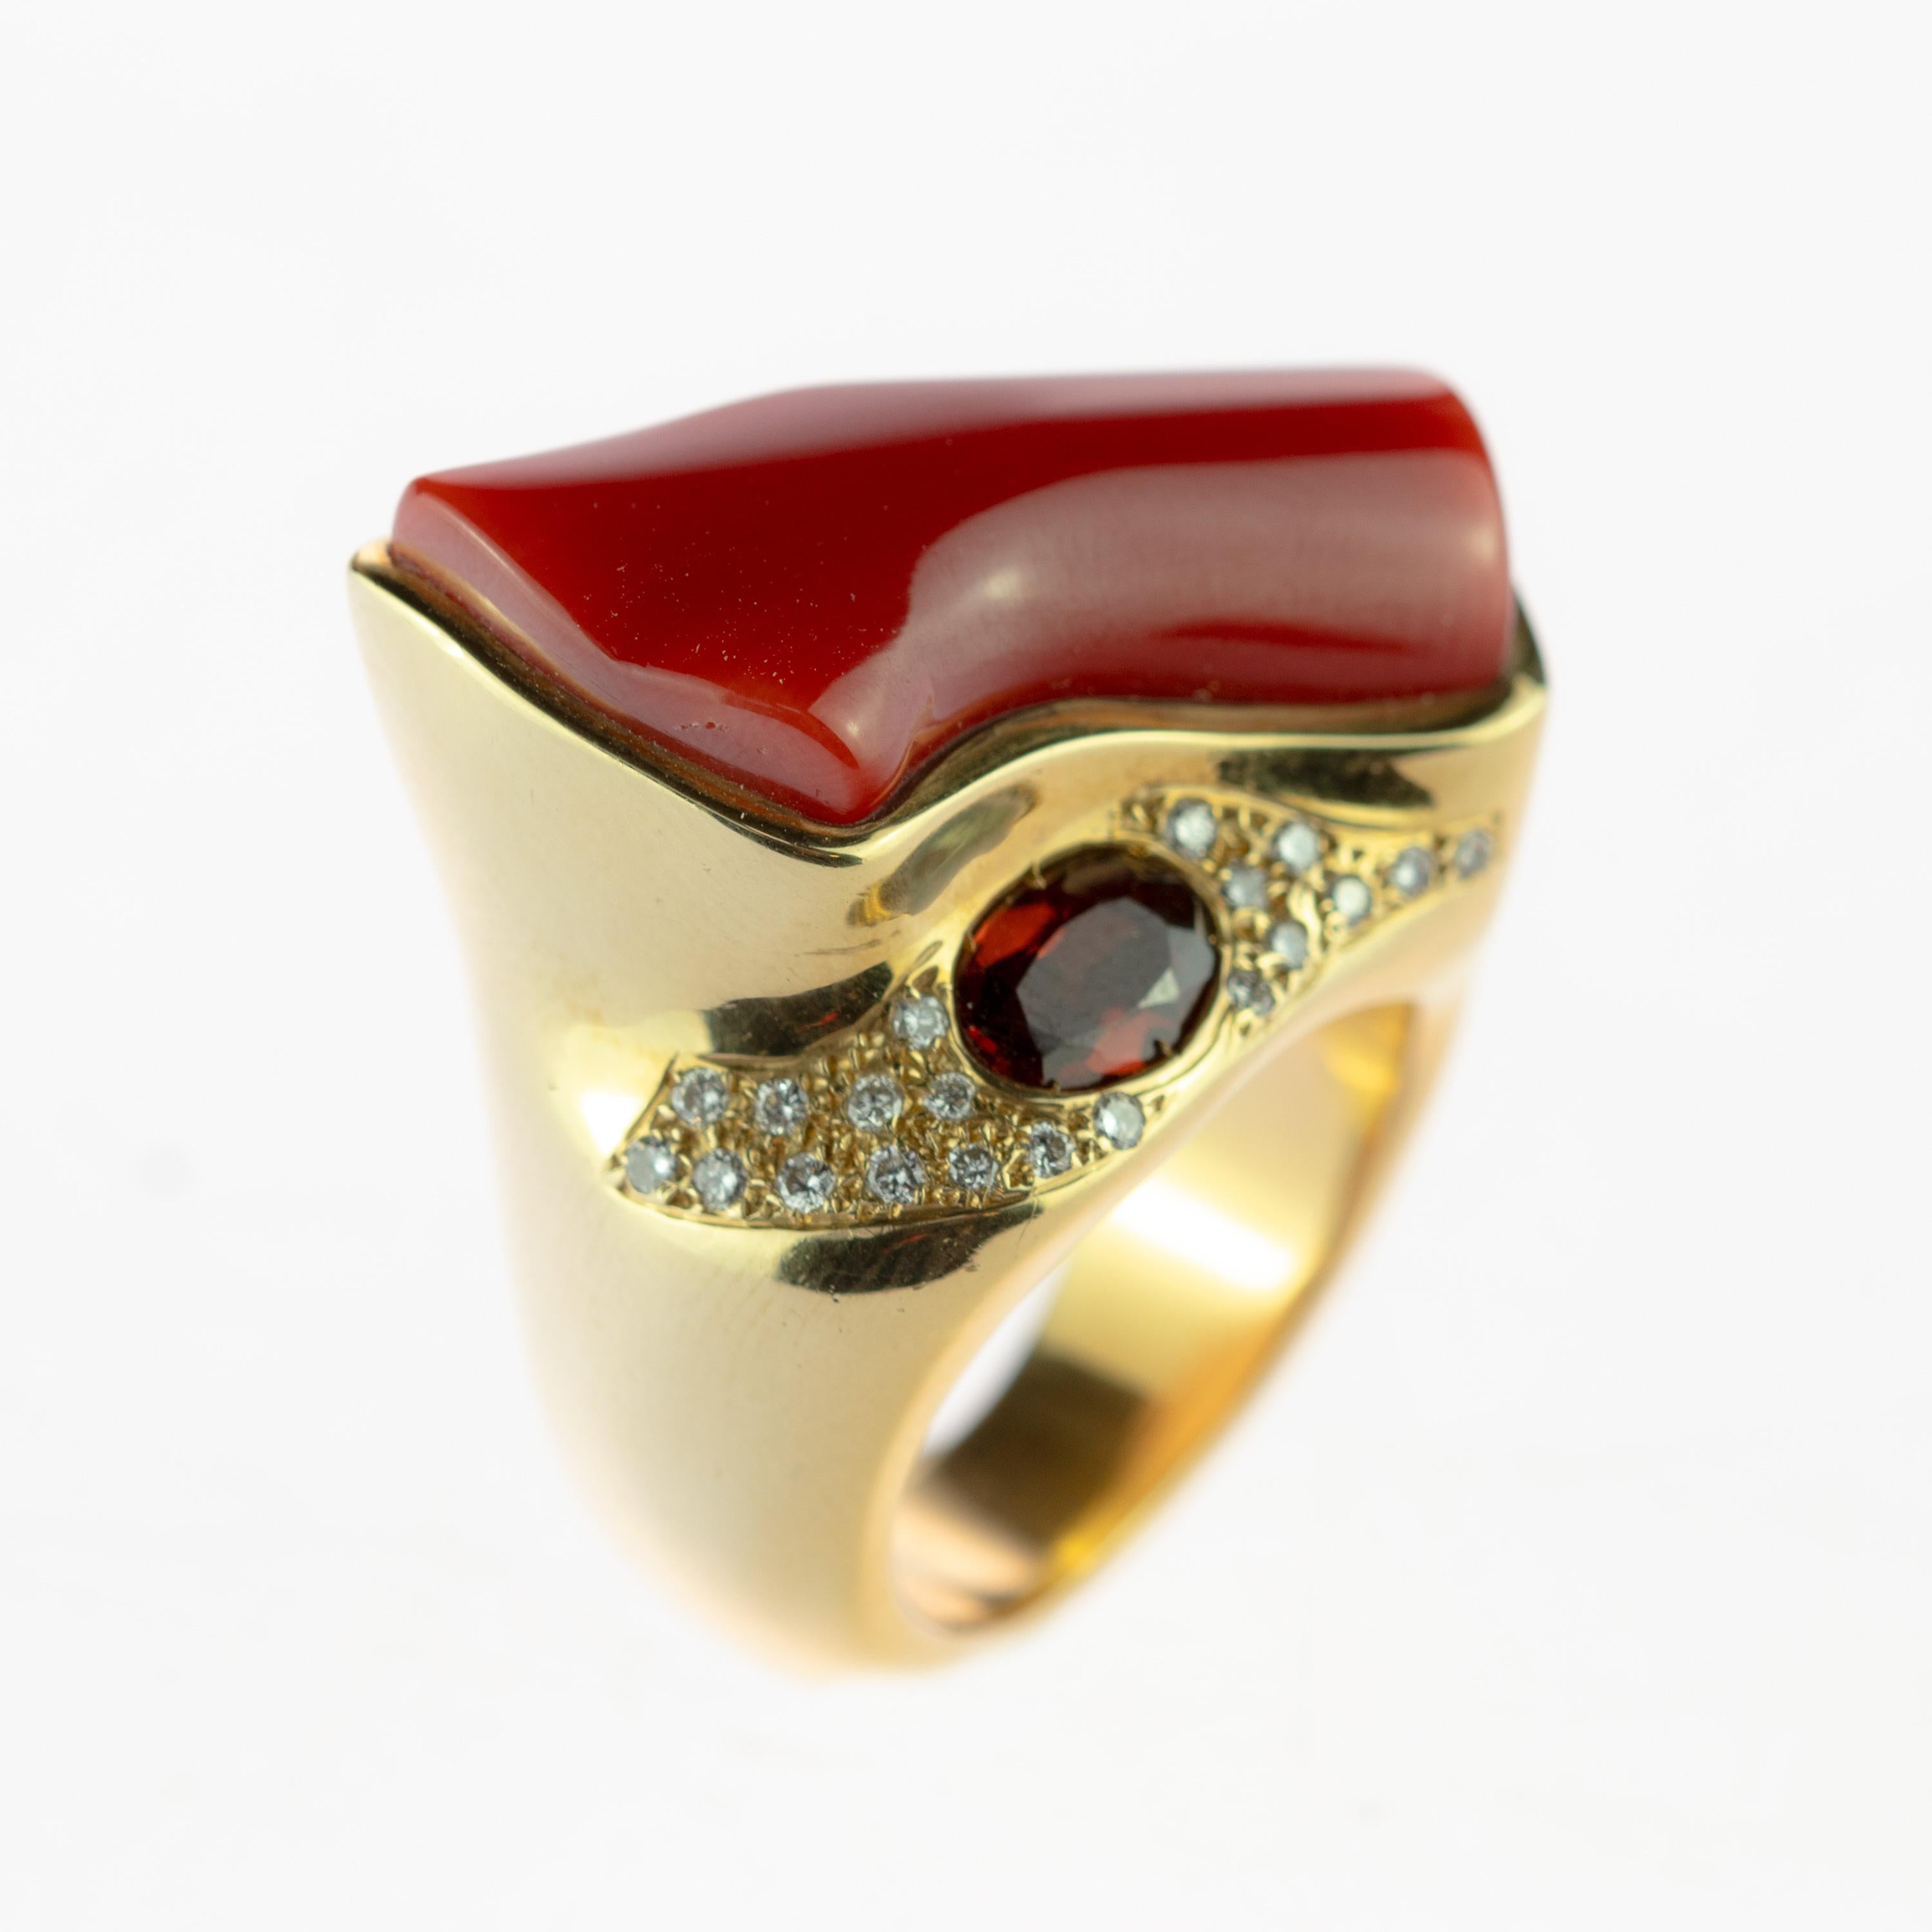 Rare and magnificent natural coral and 2 carats almandine garnet gem surrounded by a mixed yellow gold ring embellished with 0.22 carats diamonds. This sublime design is inspired by the healing powers of the three gems, making sure the mind, body